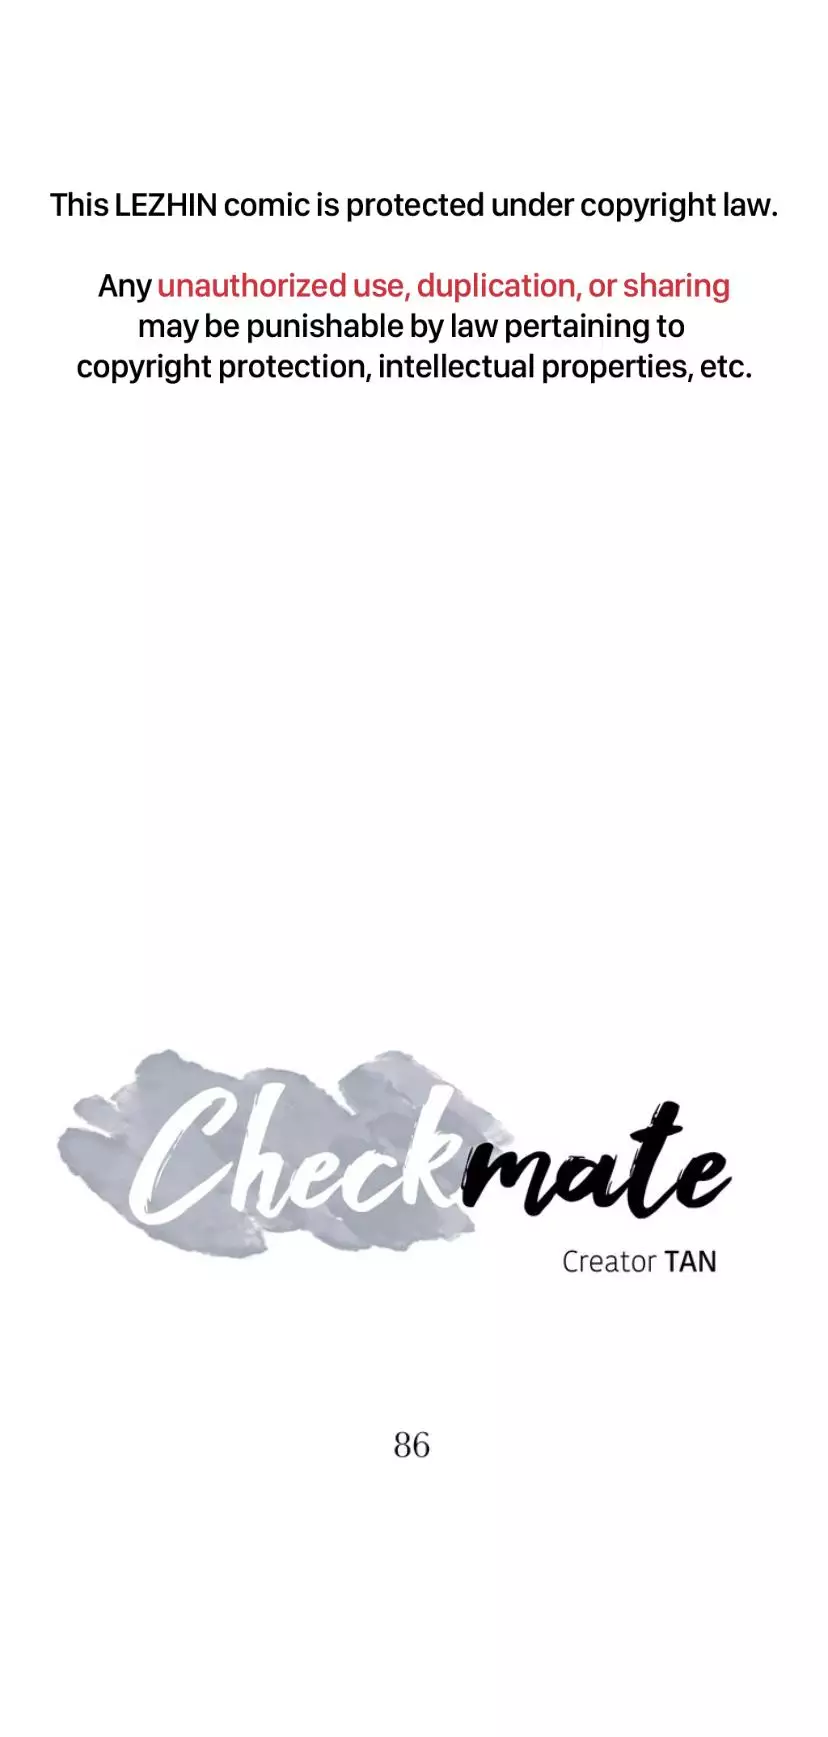 Checkmate - 86 page 1-4a9dce61